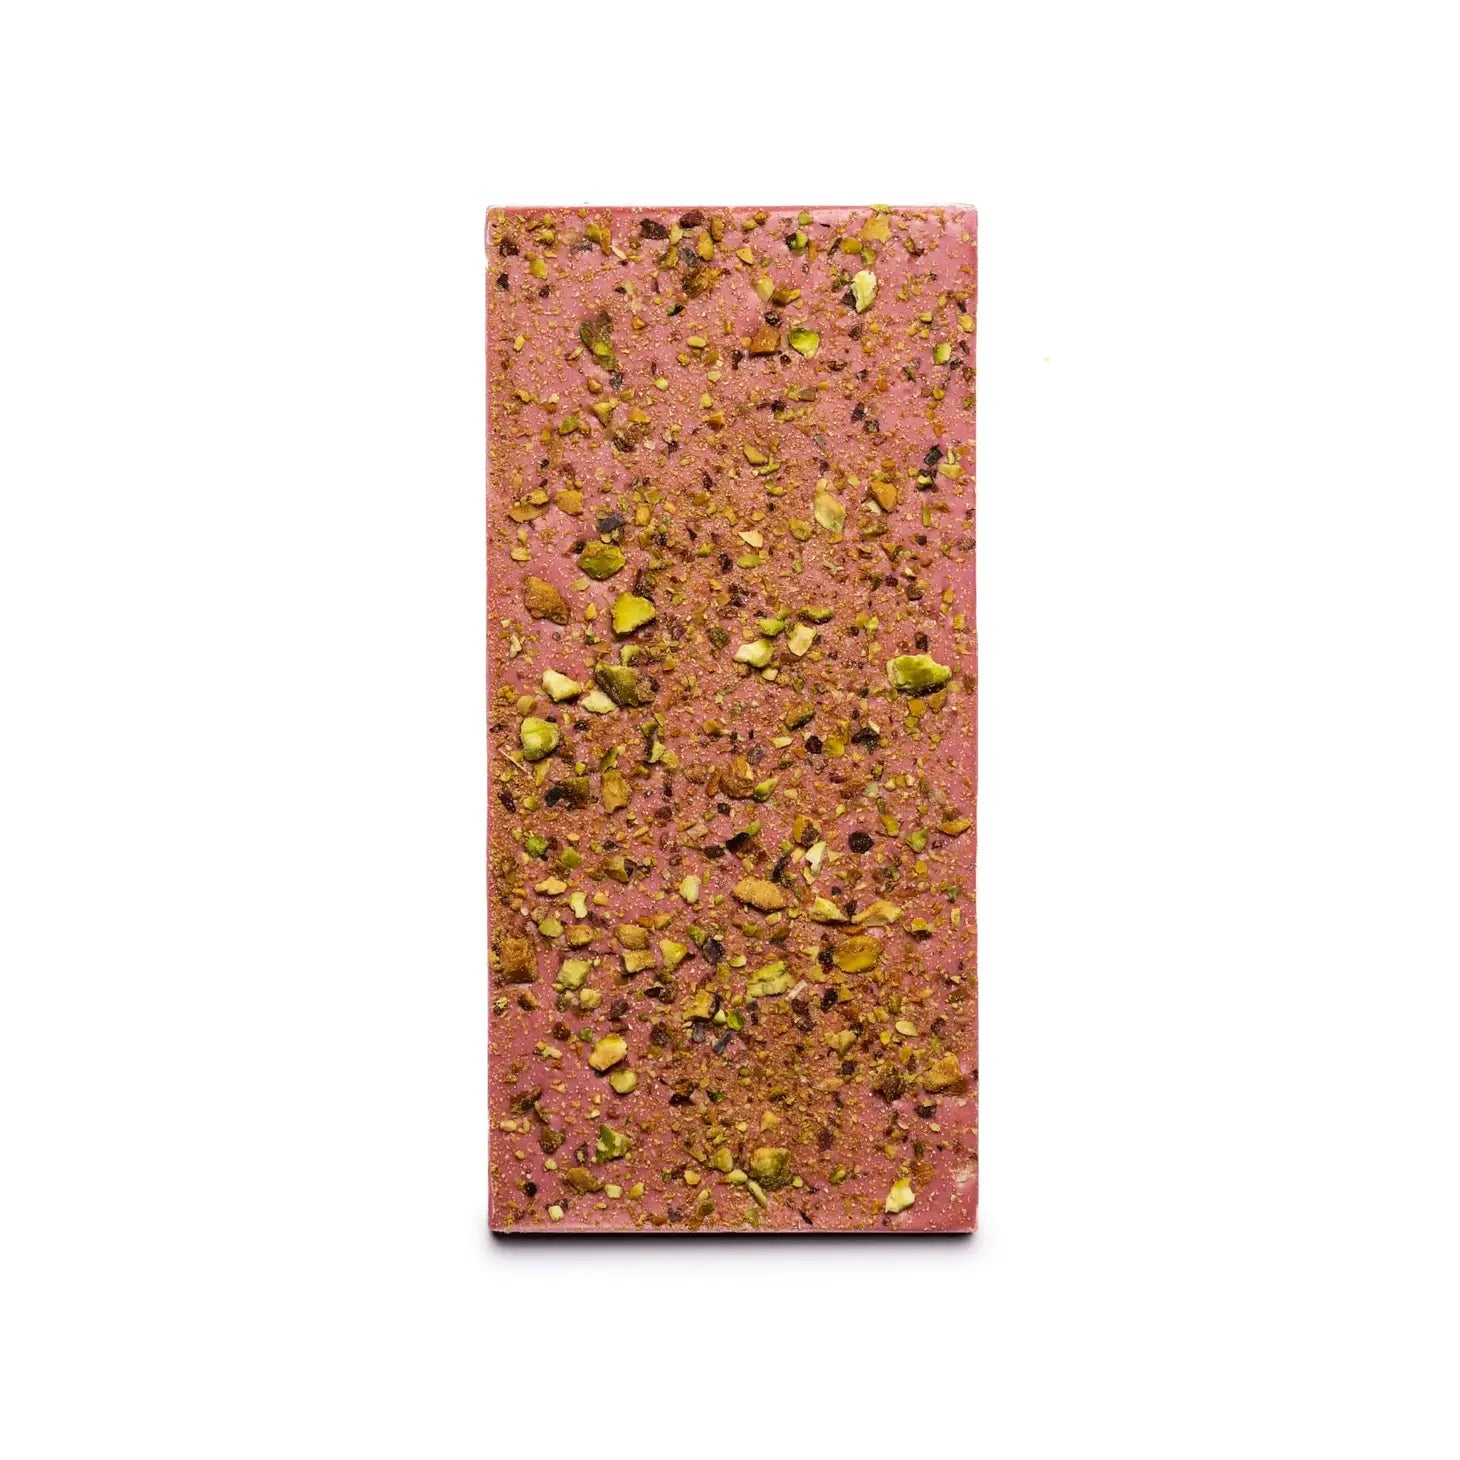 Raspberry Oat Milk White Chocolate with Pistachios by Ritual Chocolate. Valentines Day Chocolate. Gourmet valentines chocolate bar. Chocolate for valentines day. vegan chocolate. vegan gourmet chocolate. raspberry chocolate bar. oat milk chocolate bar. valentines gift.